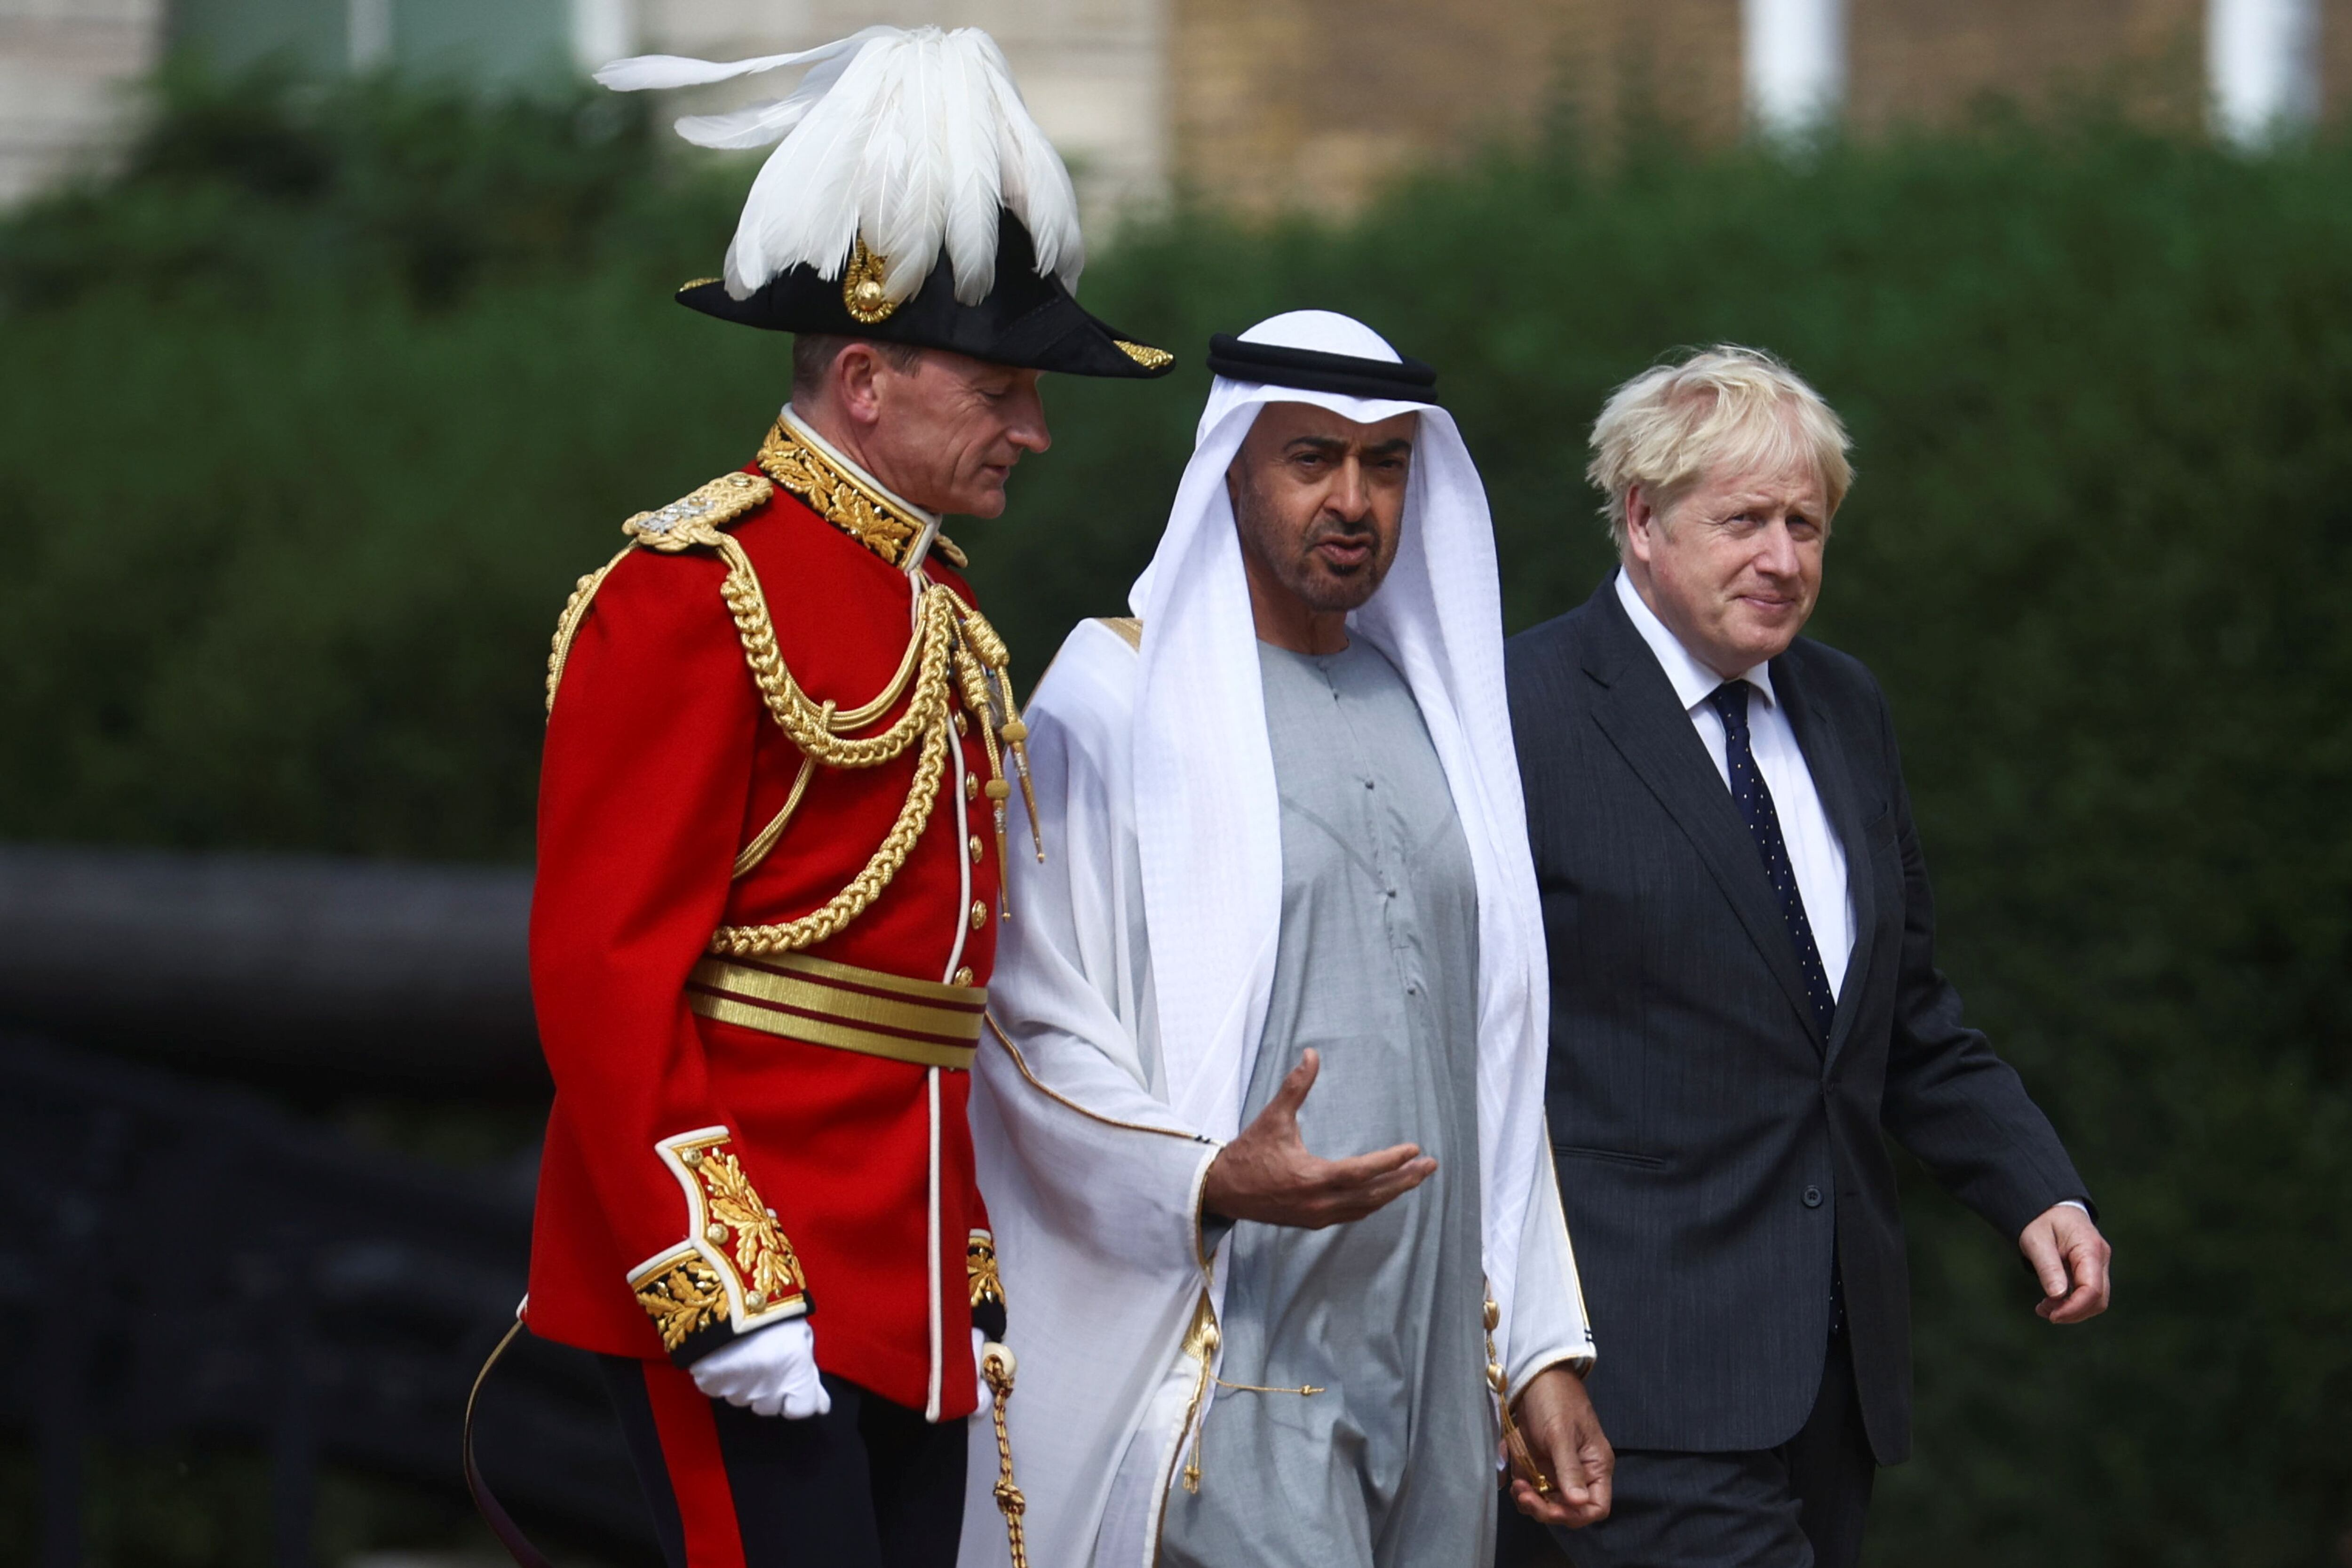 UAE, Britain ink defense research and AI tech deals. Here’s what comes next.